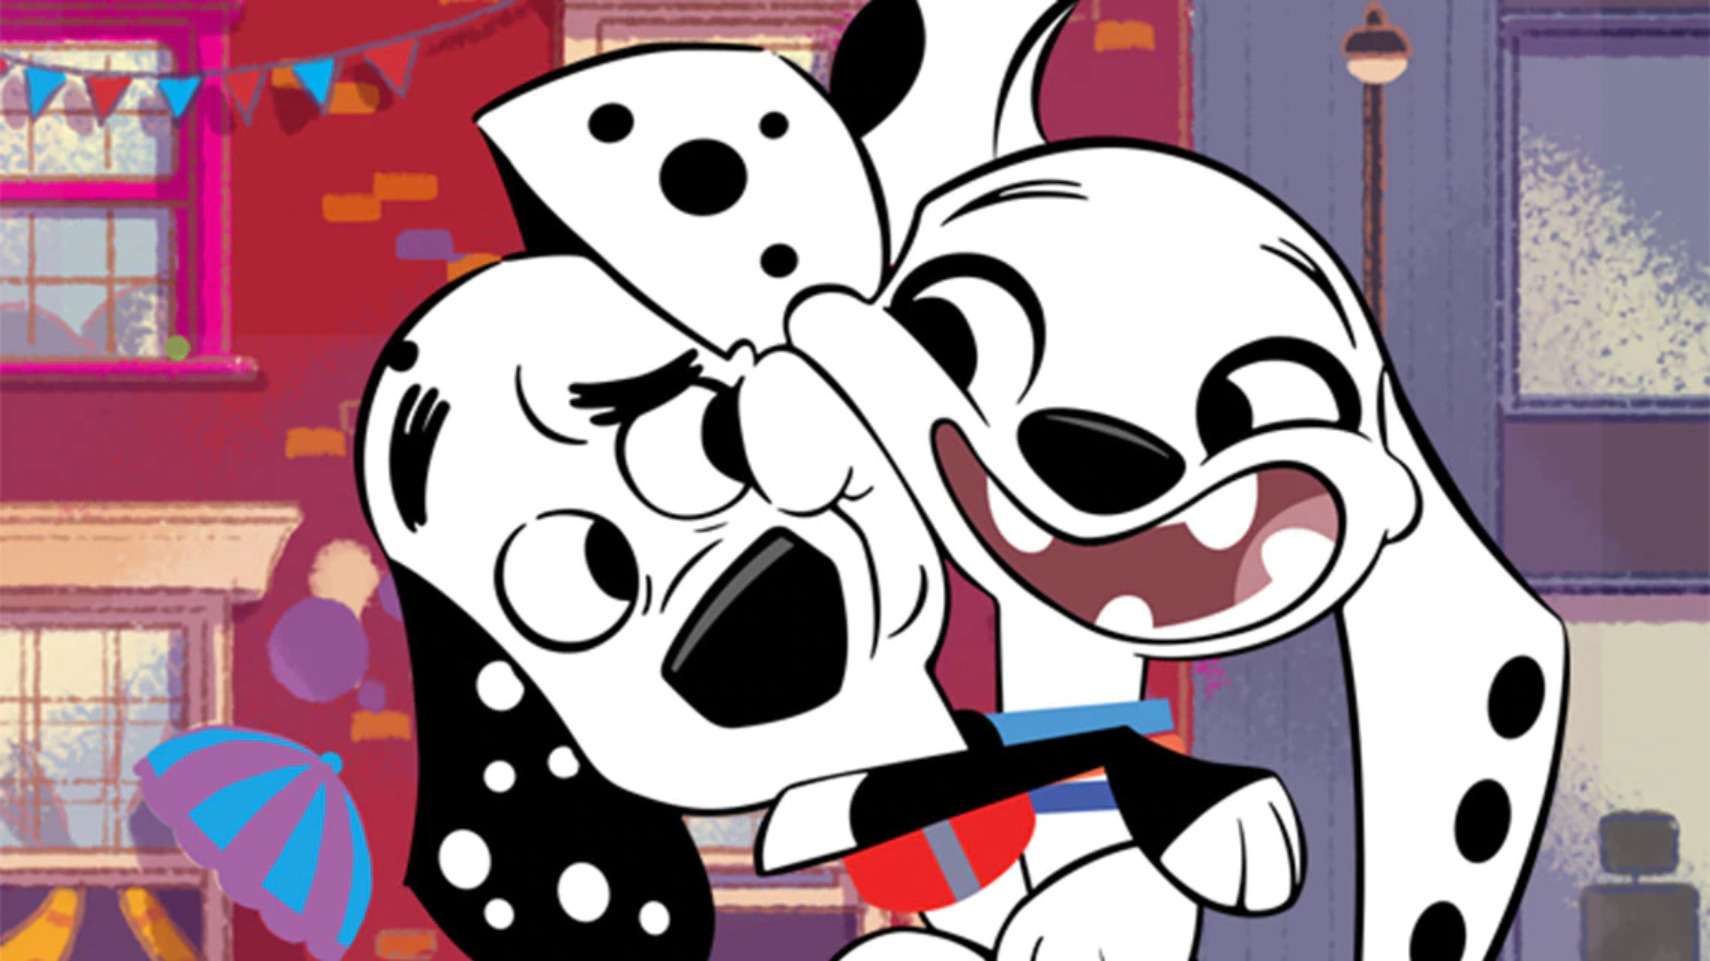 101 Dalmatian Street & The Legend Of The Three Caballeros Confirmed For